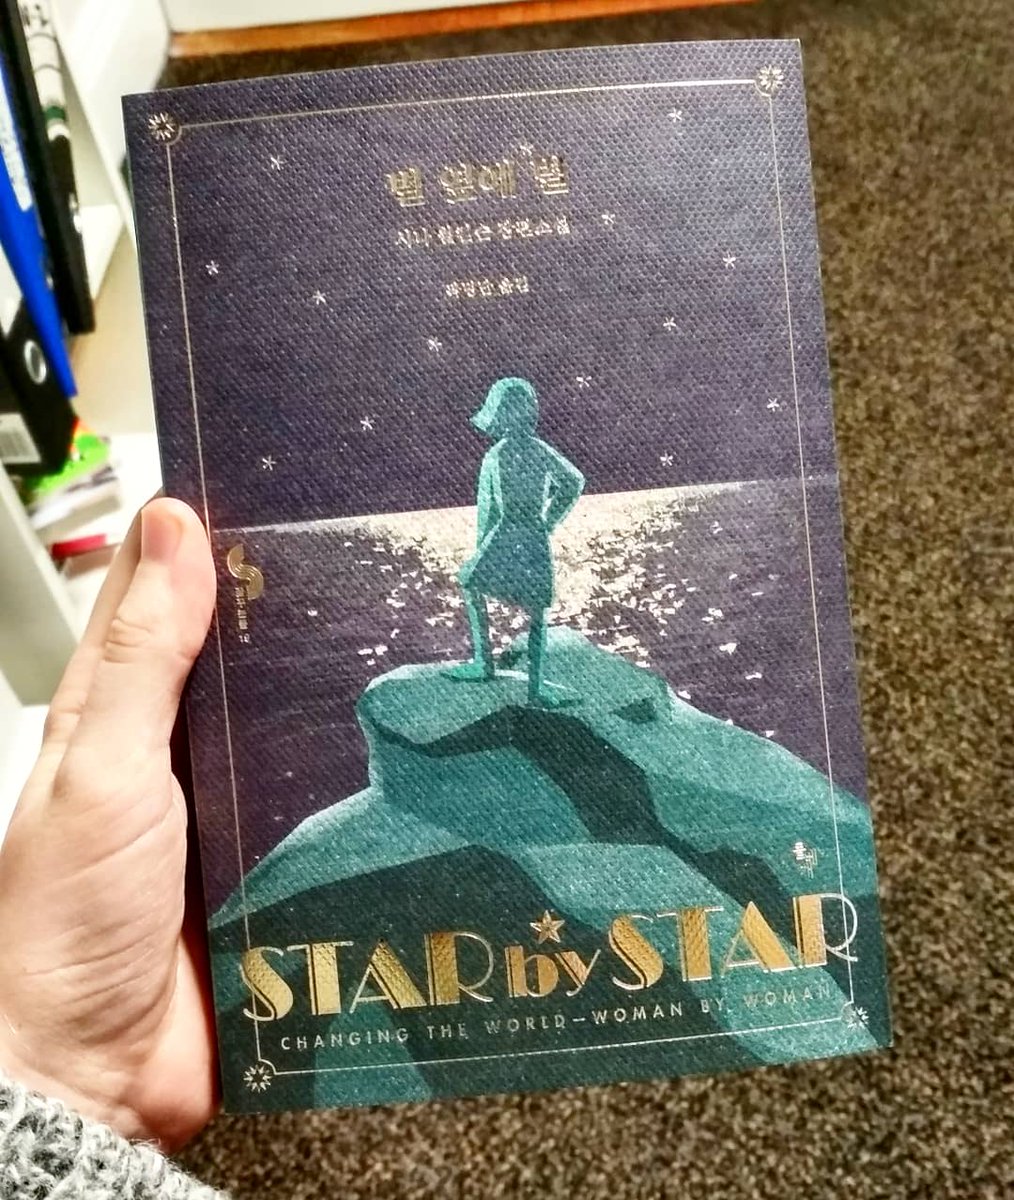 Look what's arrived! It's the Korean edition of Star by Star by Sheena Wilkinson - the story of Stella and her fight for suffrage in Northern Ireland ✨ Amazing to see an Irish story like this travel so far!  #irishwriting #suffrage #suffragettes #StarbyStar #votail100